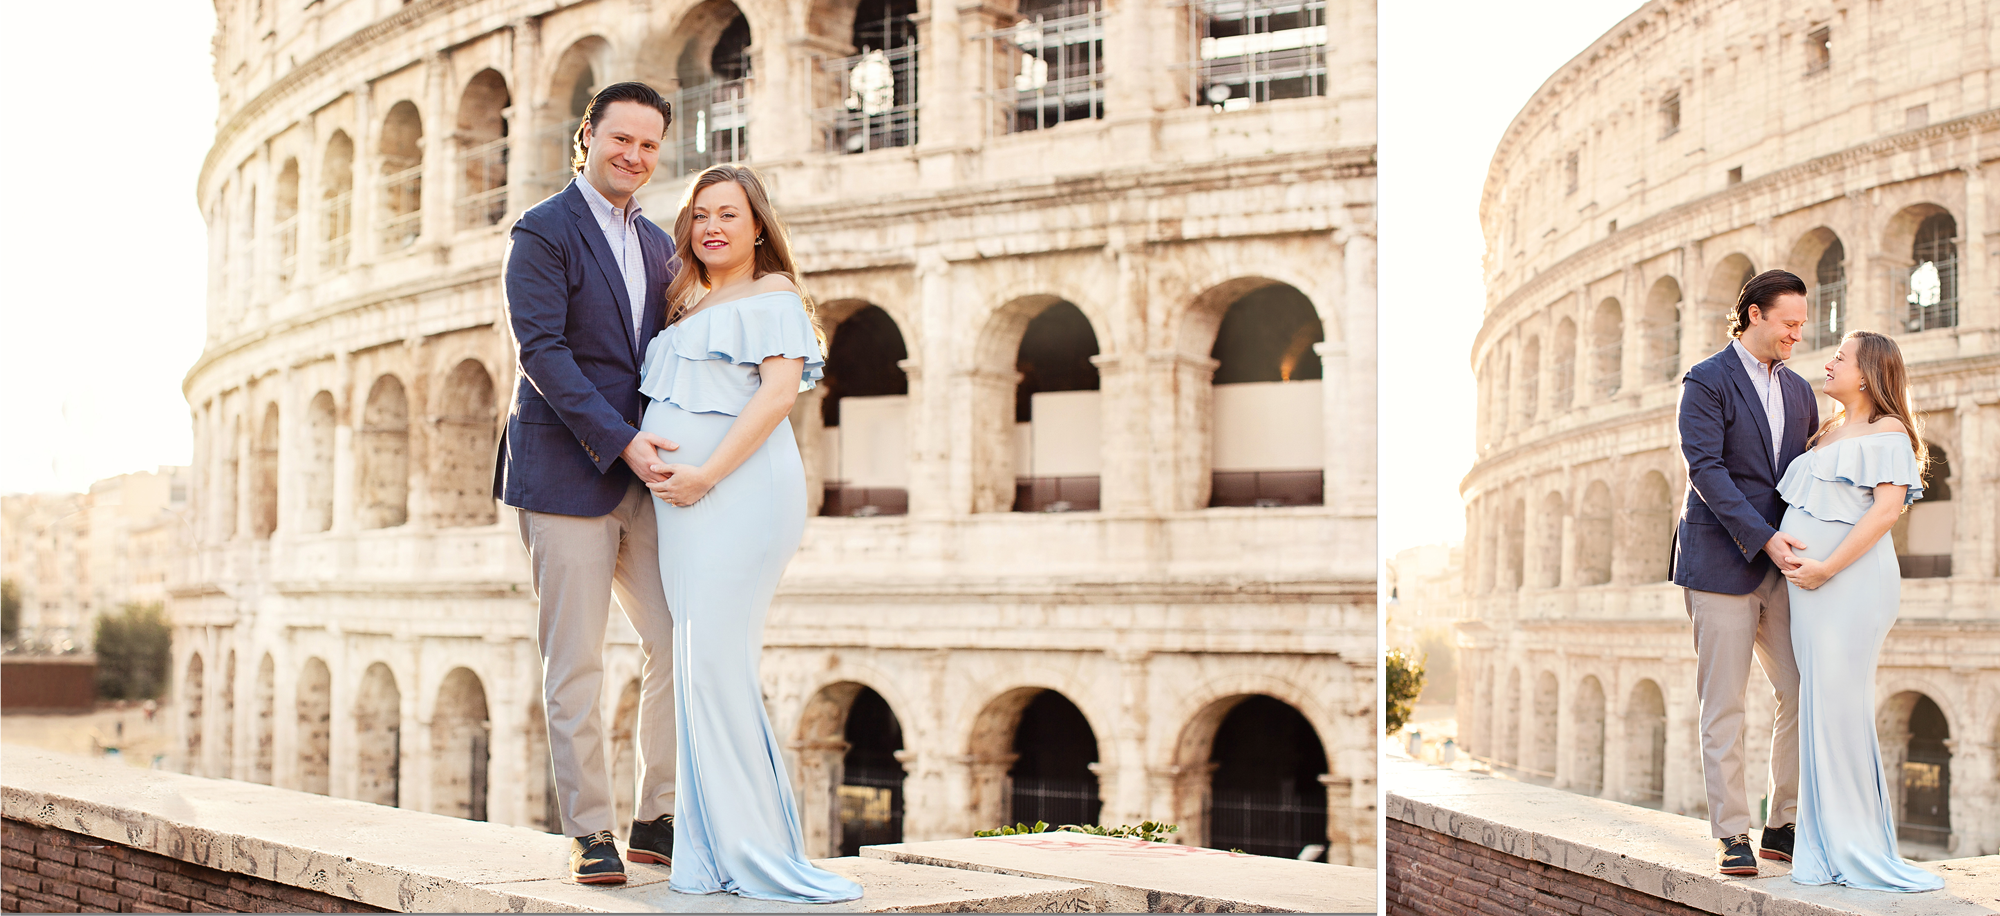 Maternity photoshoot in Rome, Italy by photographer Tricia Anne Photography | Rome Photographer, photoshoot rome, Rome babymoon photoshoot, maternity photo shoot, Colosseum Photoshoot